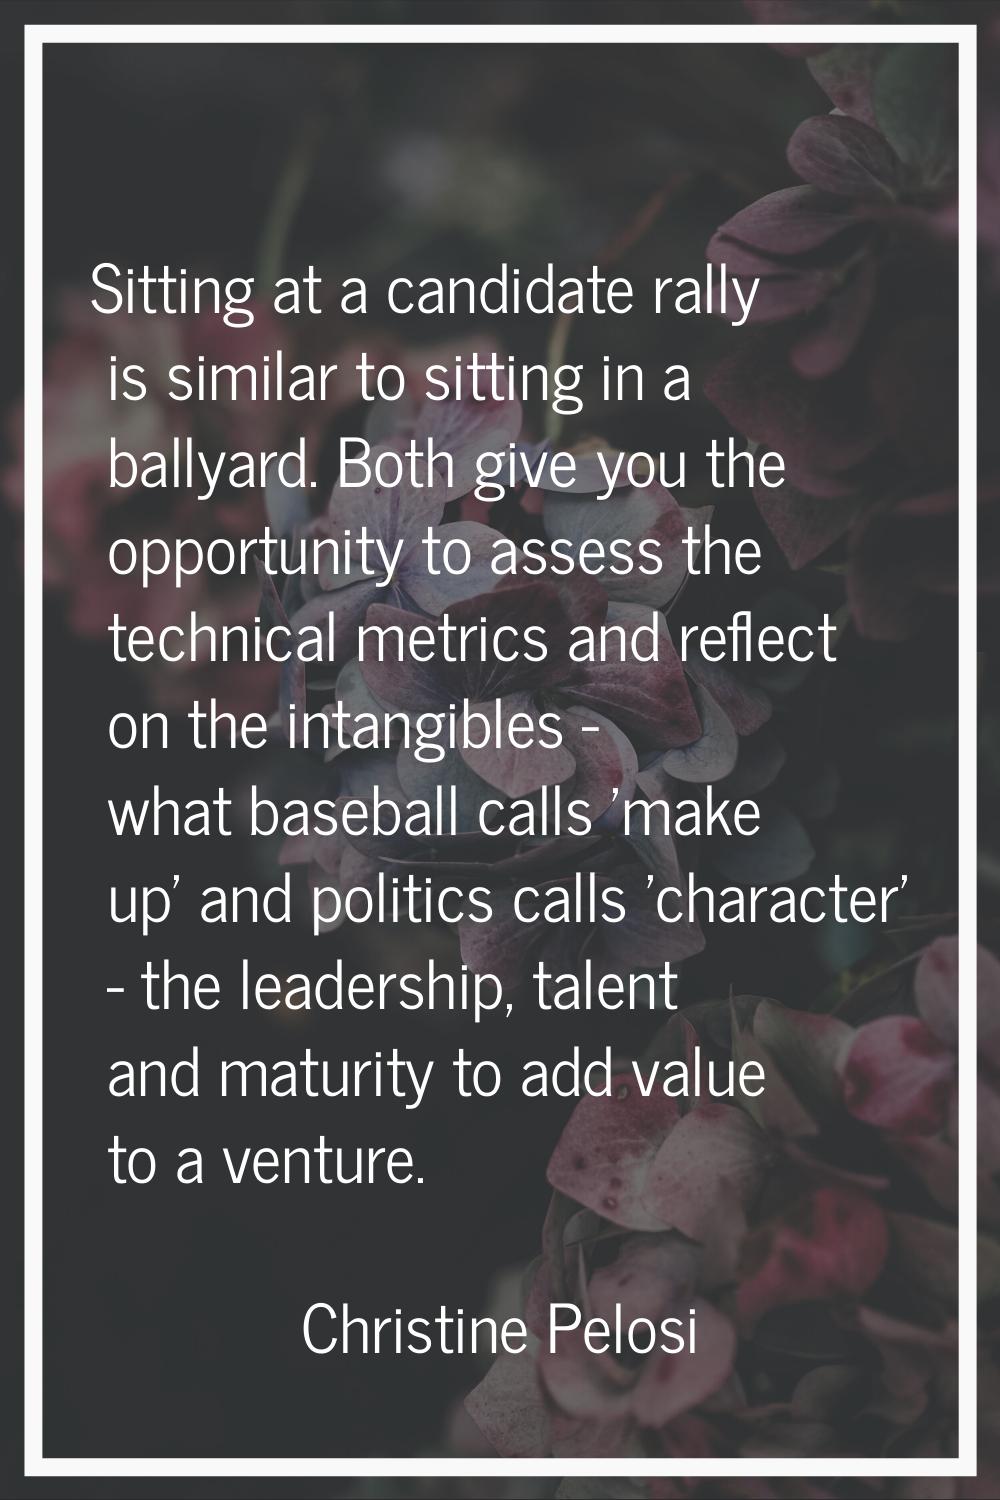 Sitting at a candidate rally is similar to sitting in a ballyard. Both give you the opportunity to 